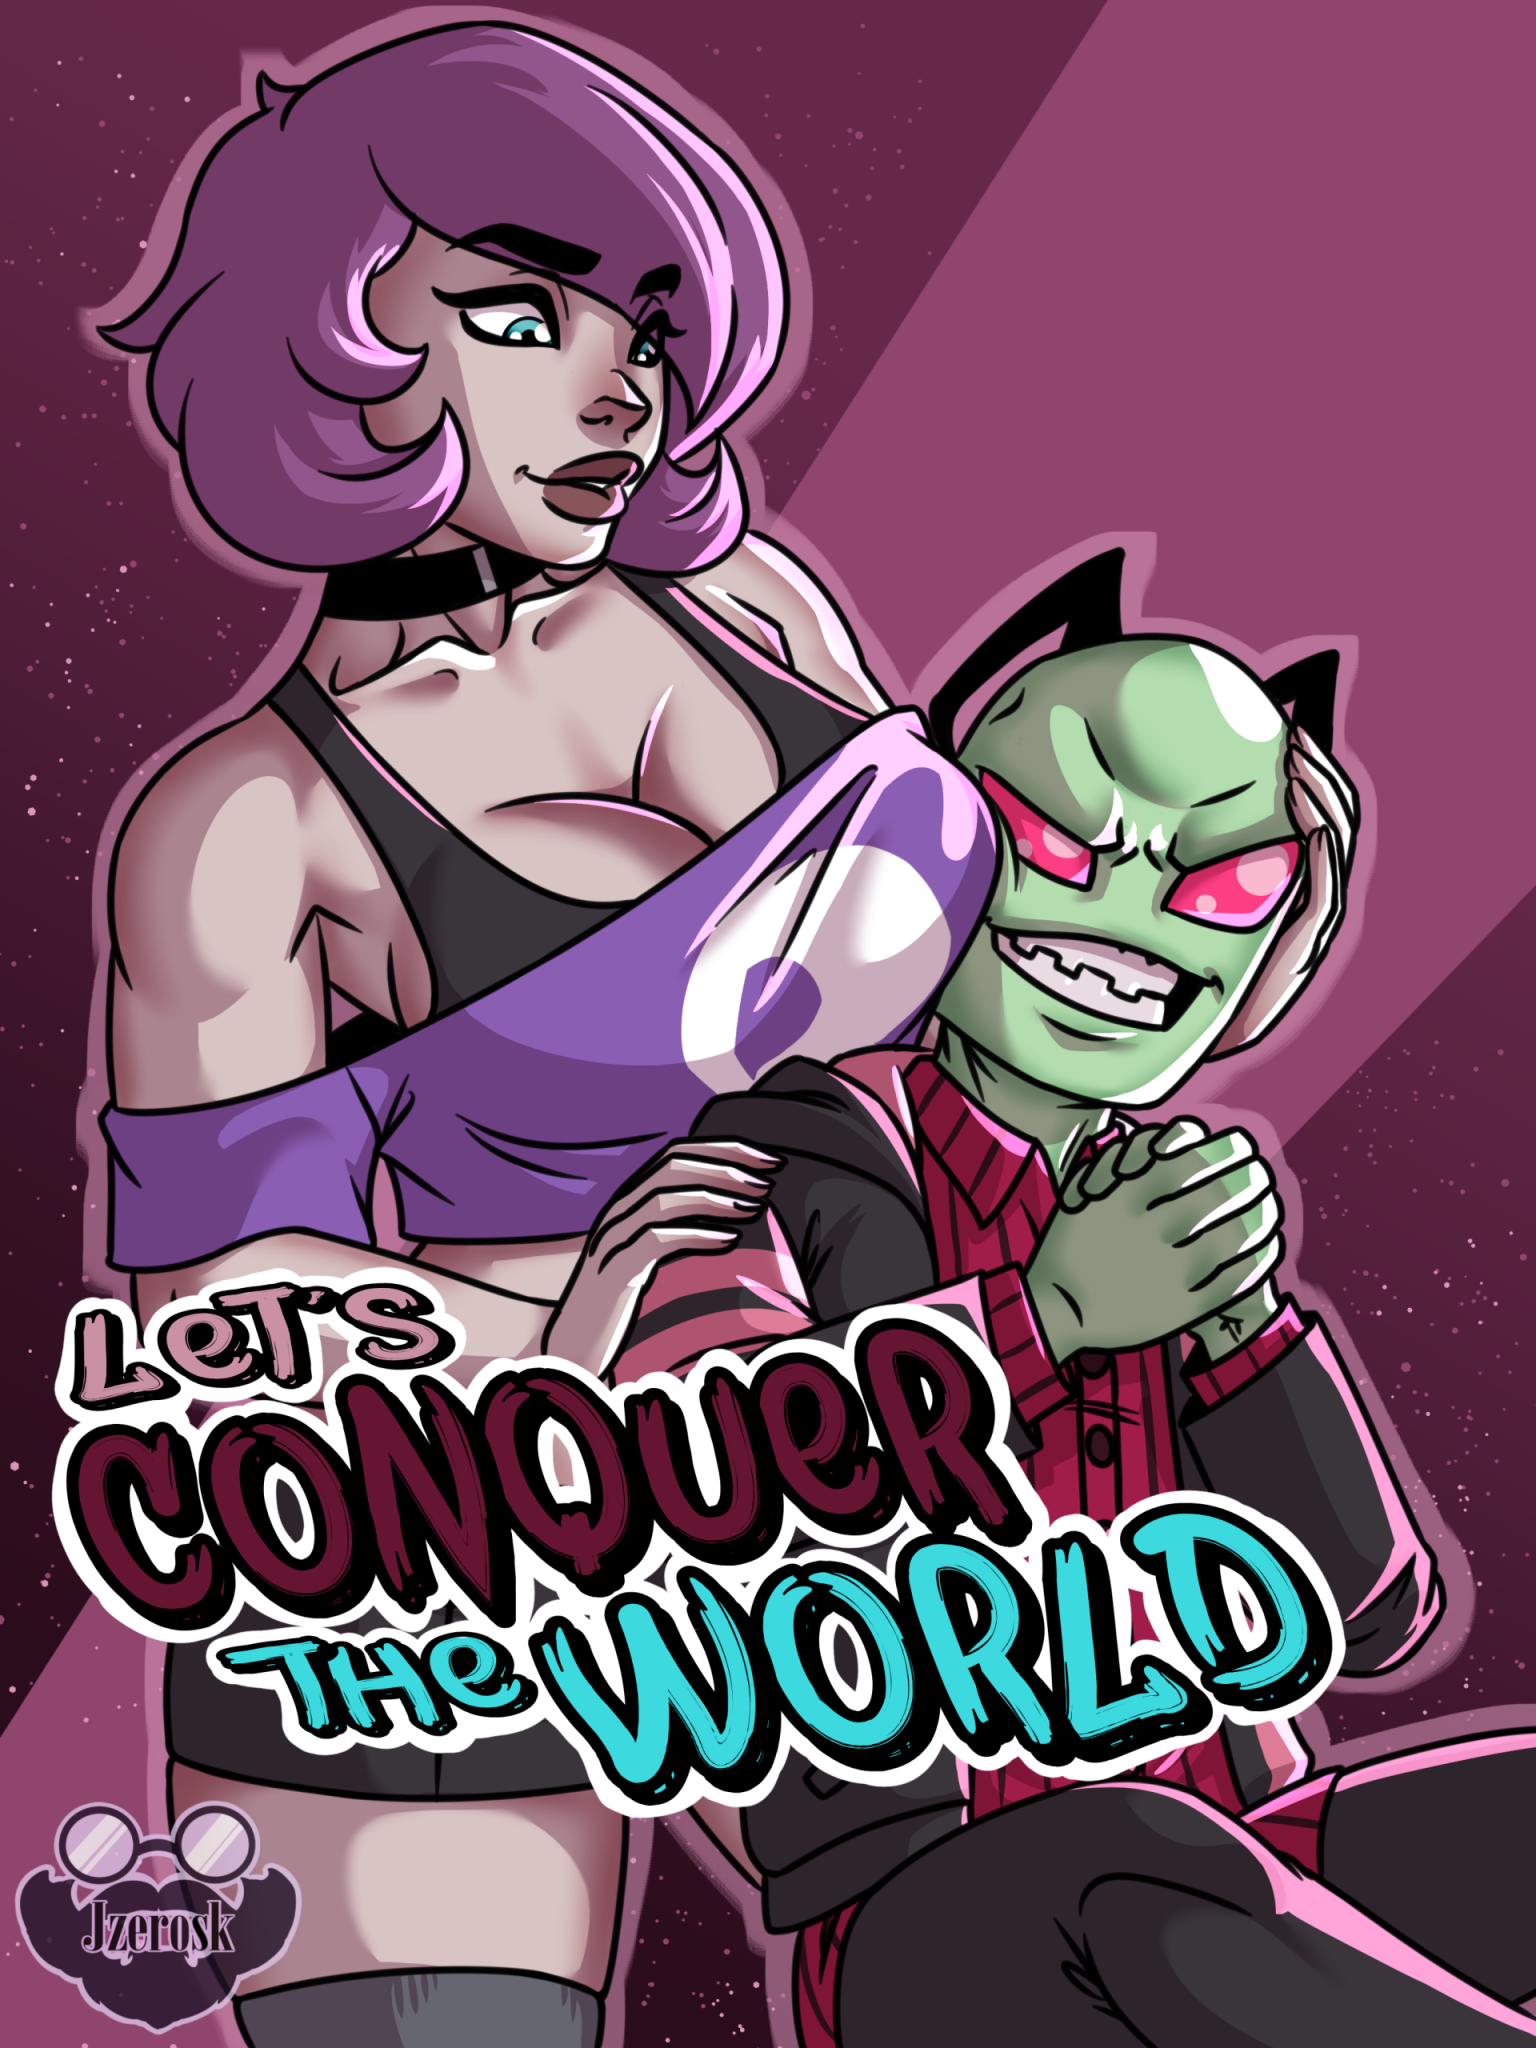 Let’s Conquer the World